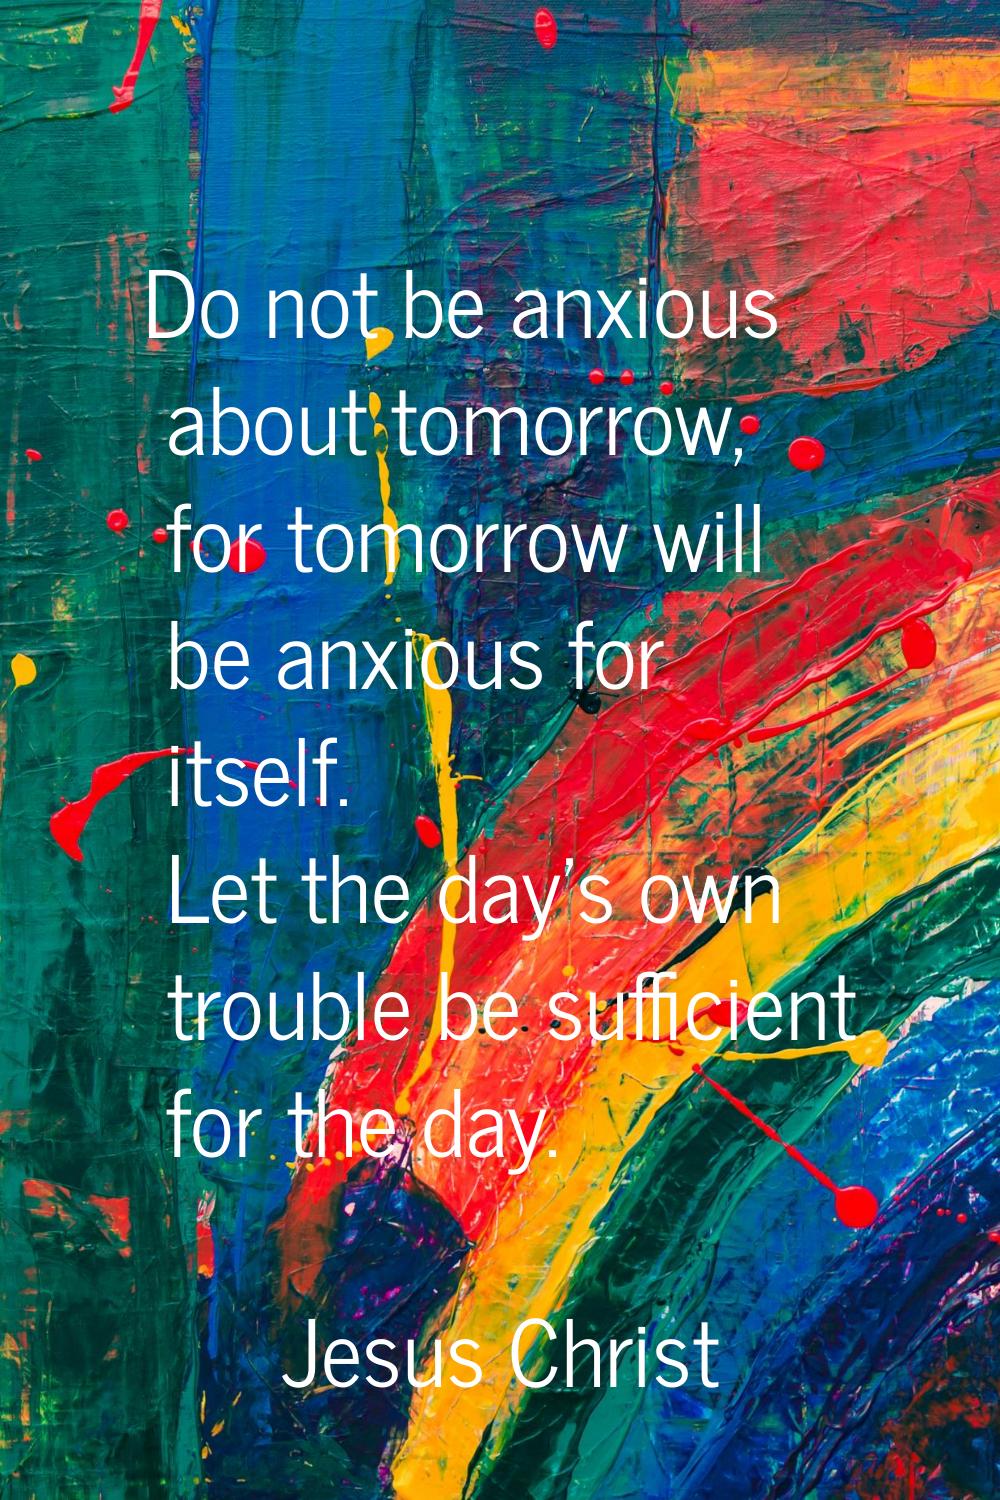 Do not be anxious about tomorrow, for tomorrow will be anxious for itself. Let the day's own troubl